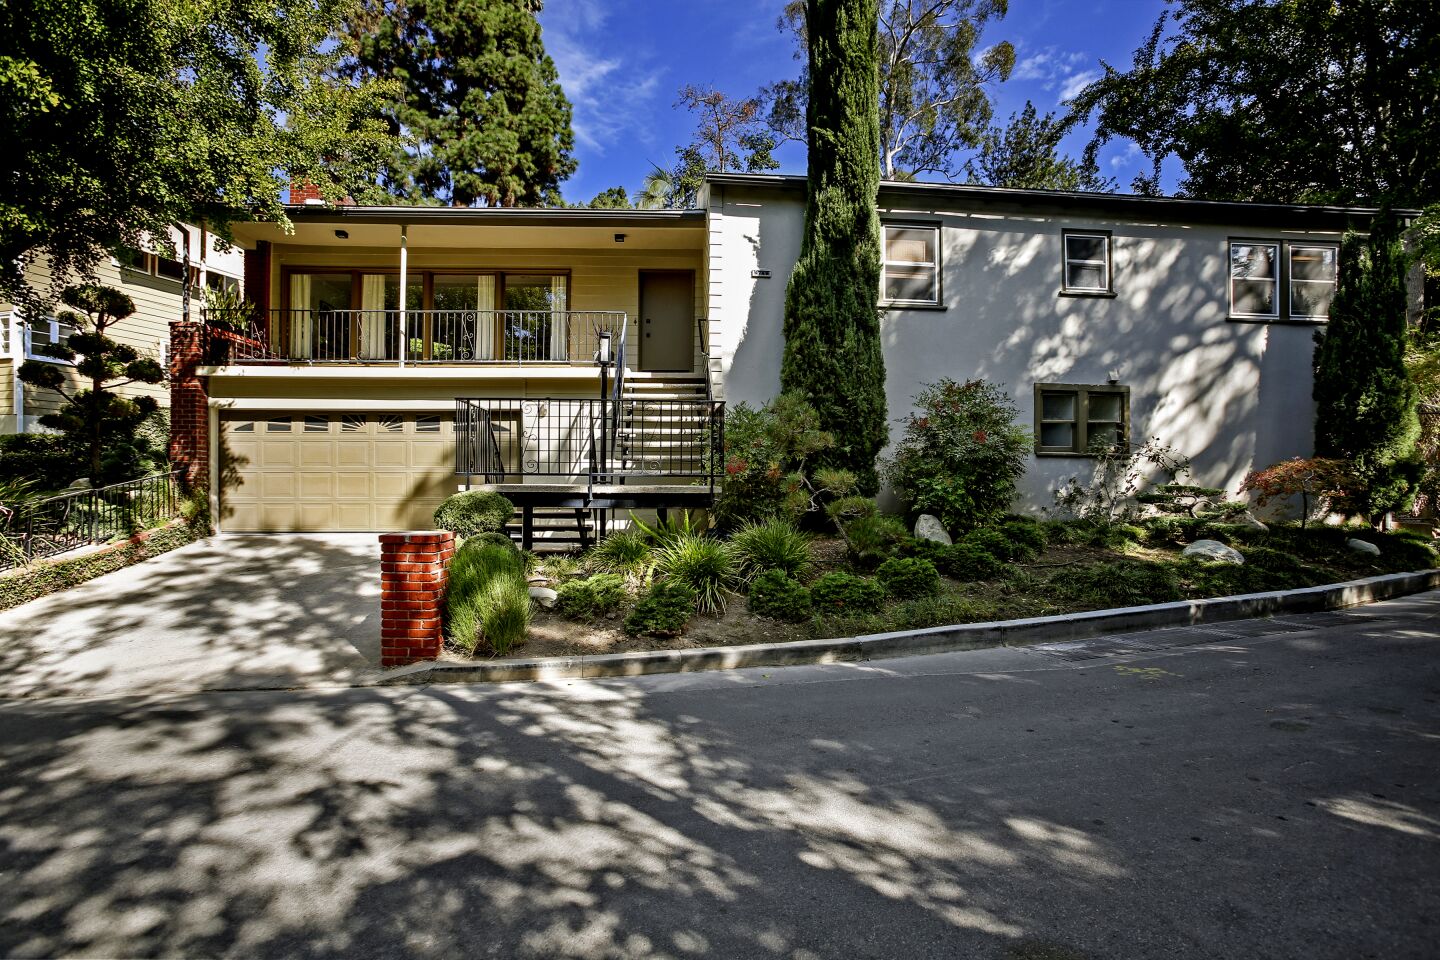 Filmmaker Anthony Russo sold one of two homes he owns in Los Feliz.